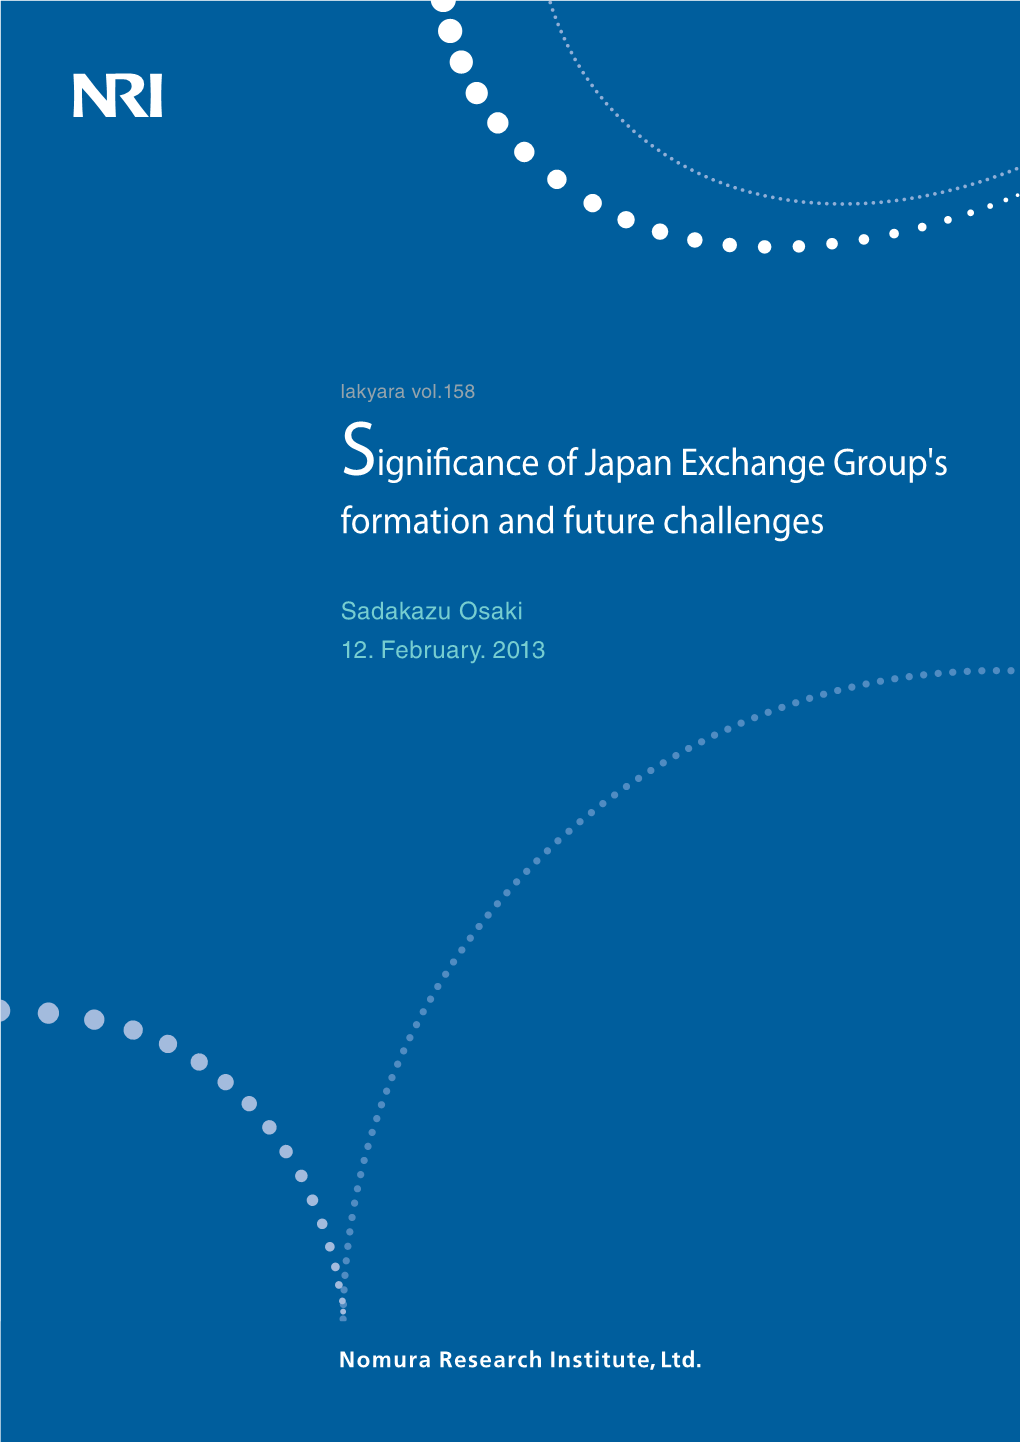 Significance of Japan Exchange Group's Formation and Future Challenges